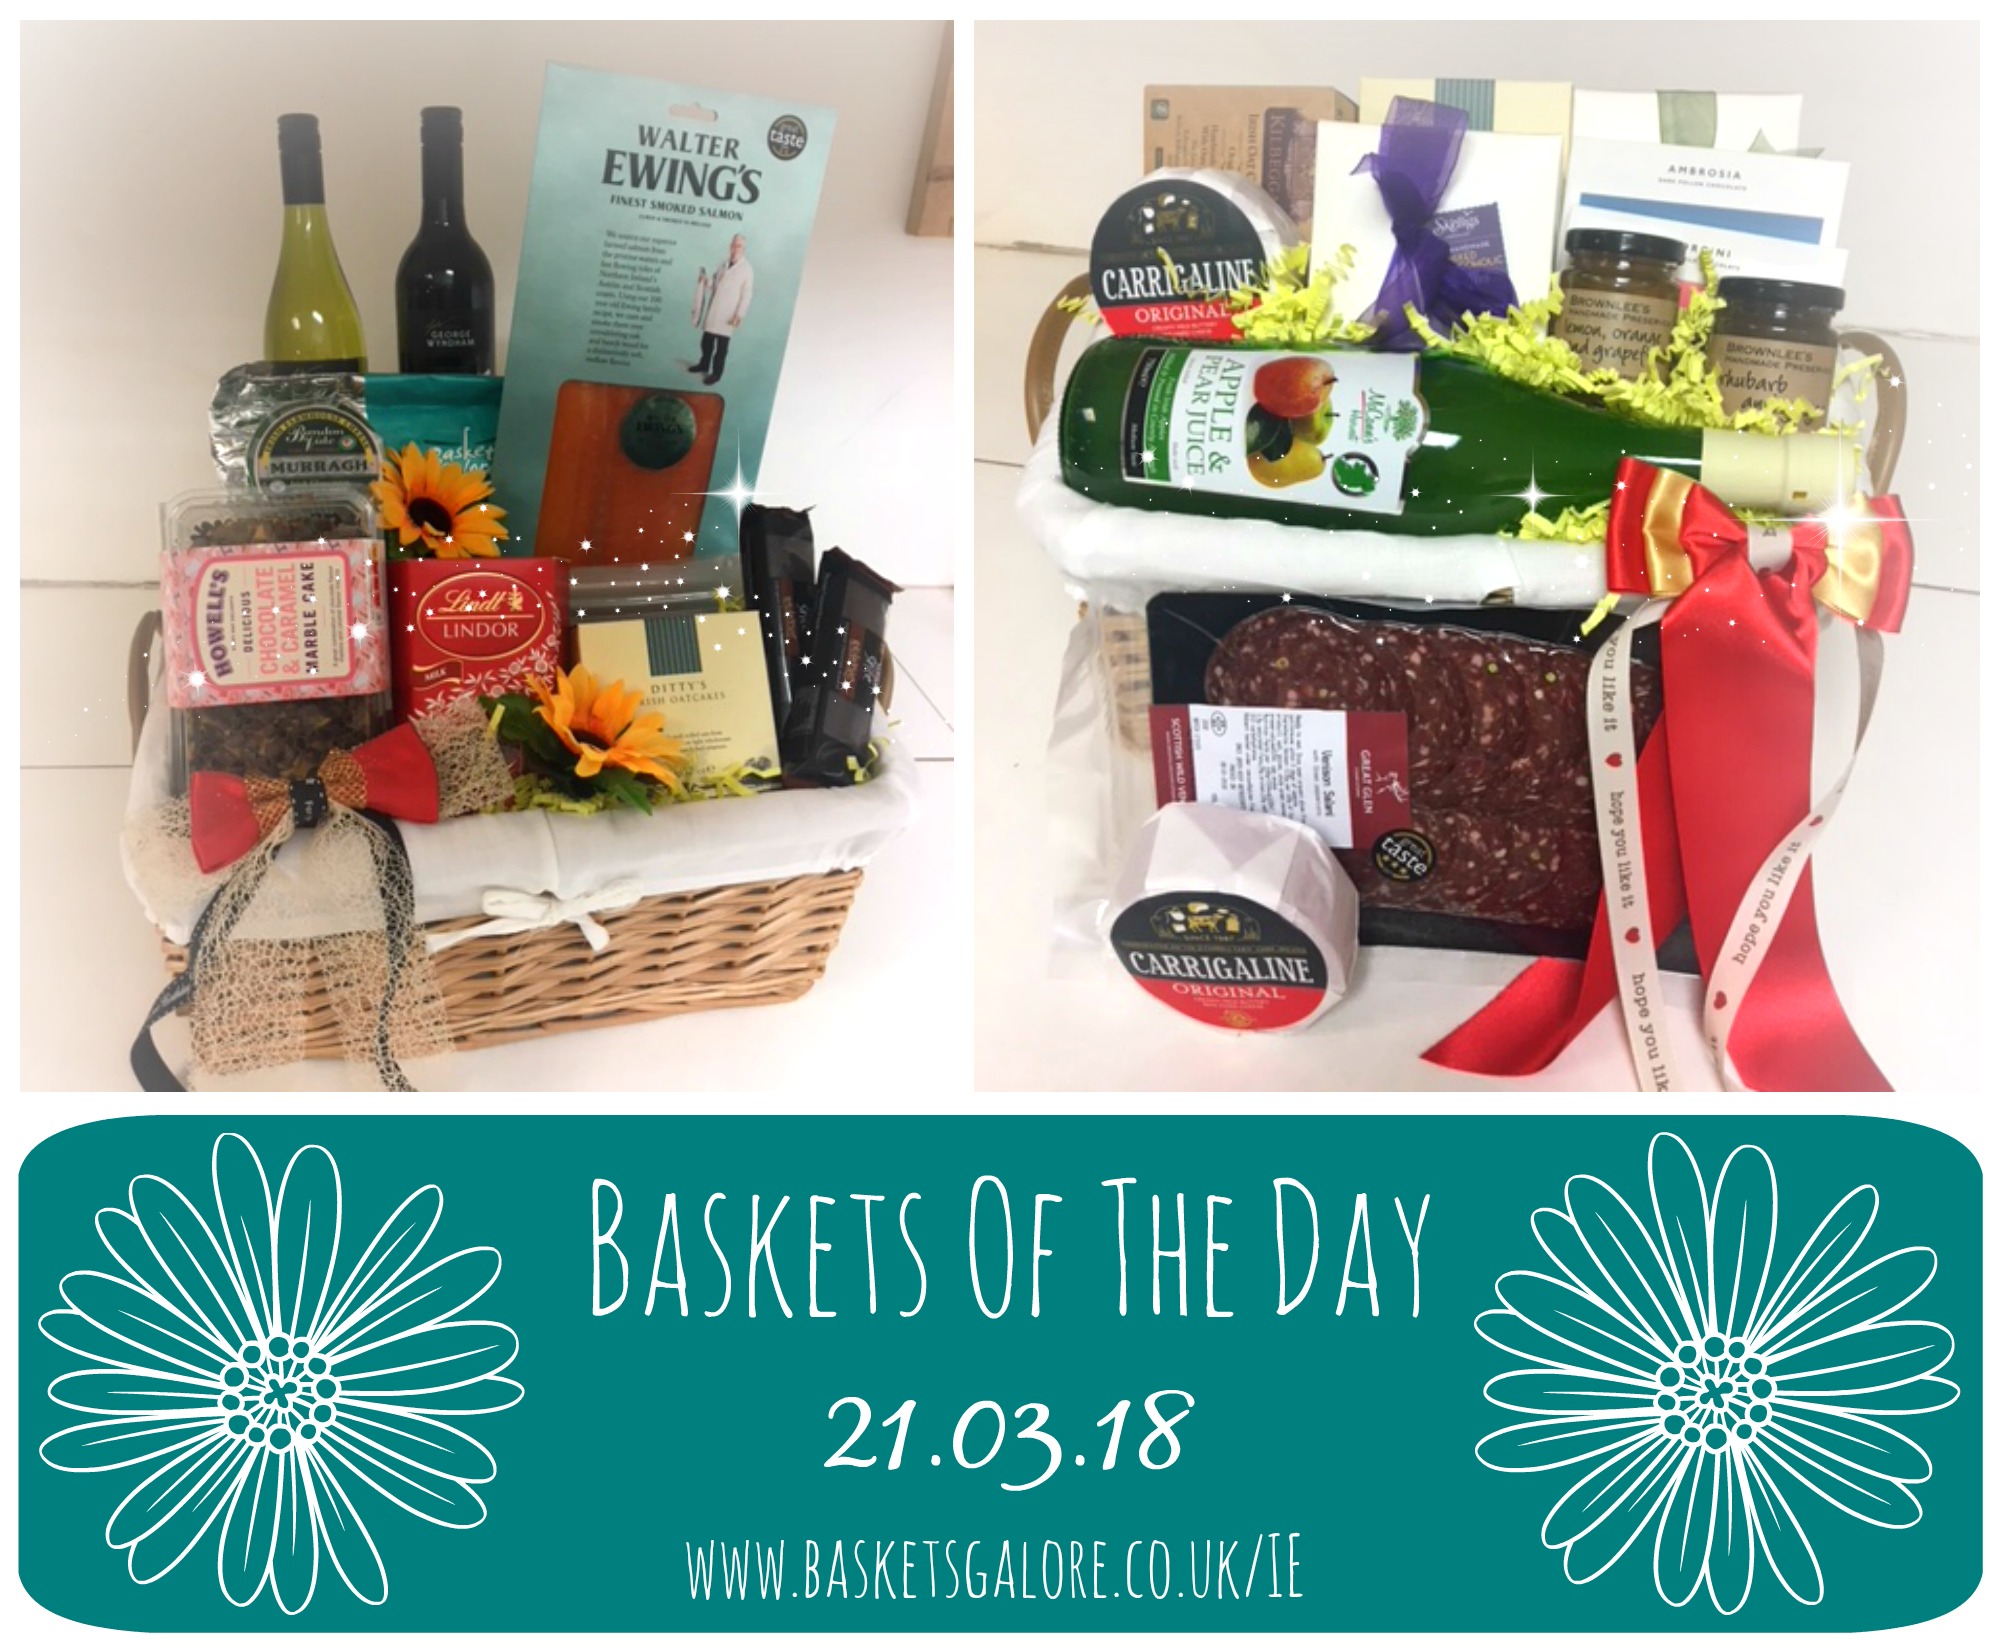 Baskets Galore’s Customer Gifts – Gift Basket of the Day 21.03.18